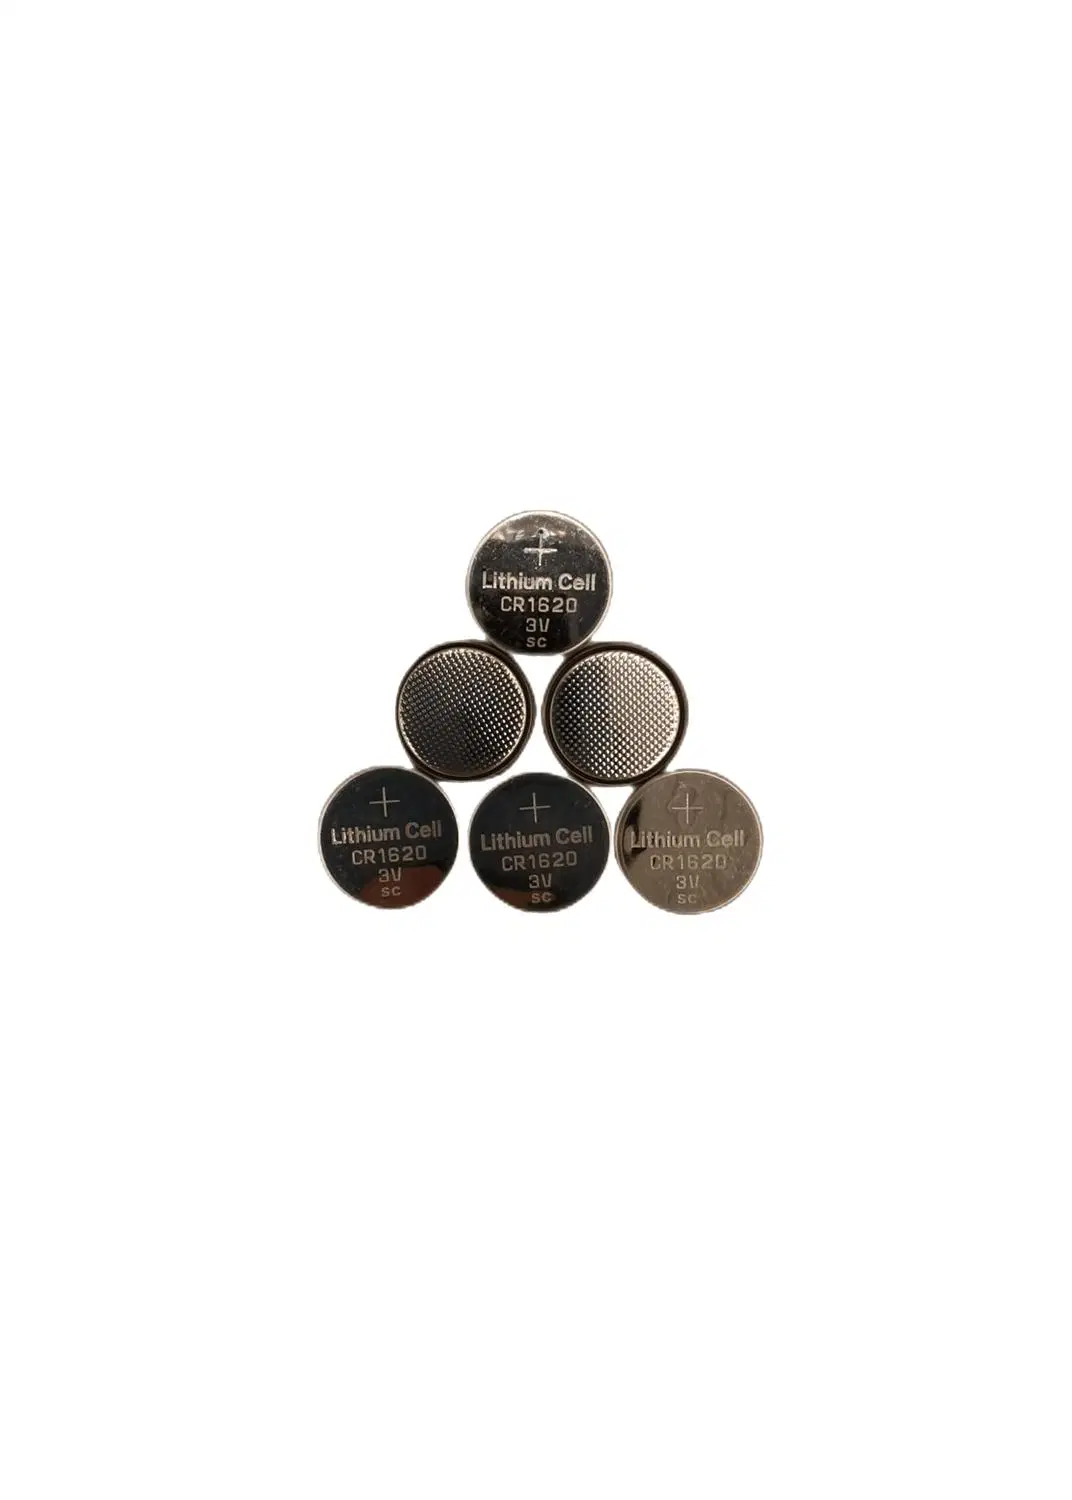 Cbbcell Cr1620 Lithium Button Battery for Watch Toy